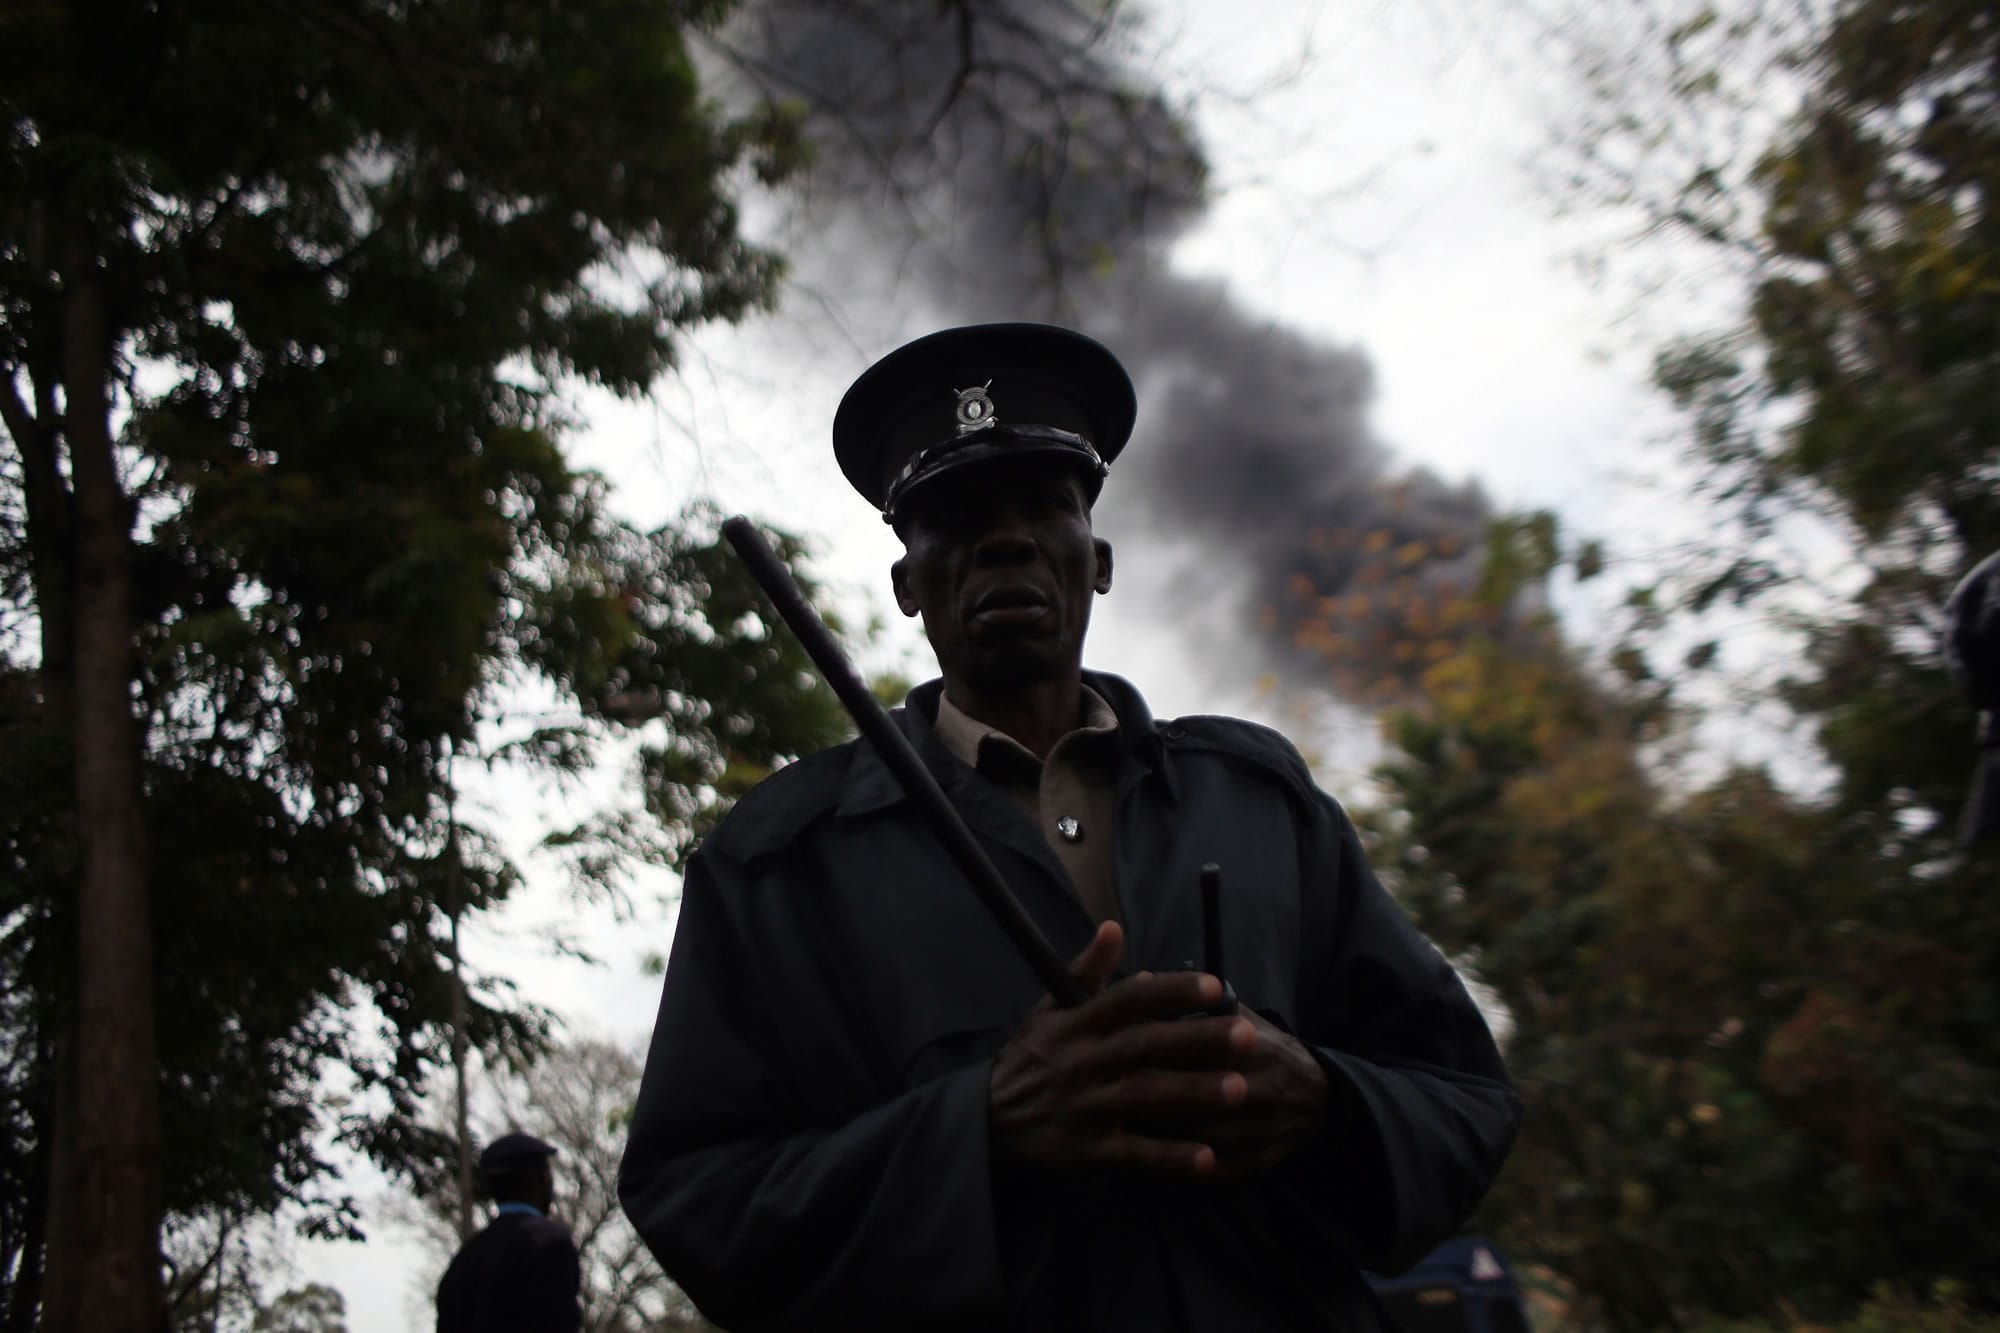 Files/Associated Press
A security officer stands guard as heavy smoke rises from the Westgate Mall in Nairobi, Kenya, on Monday, the third day of last weekend's siege.